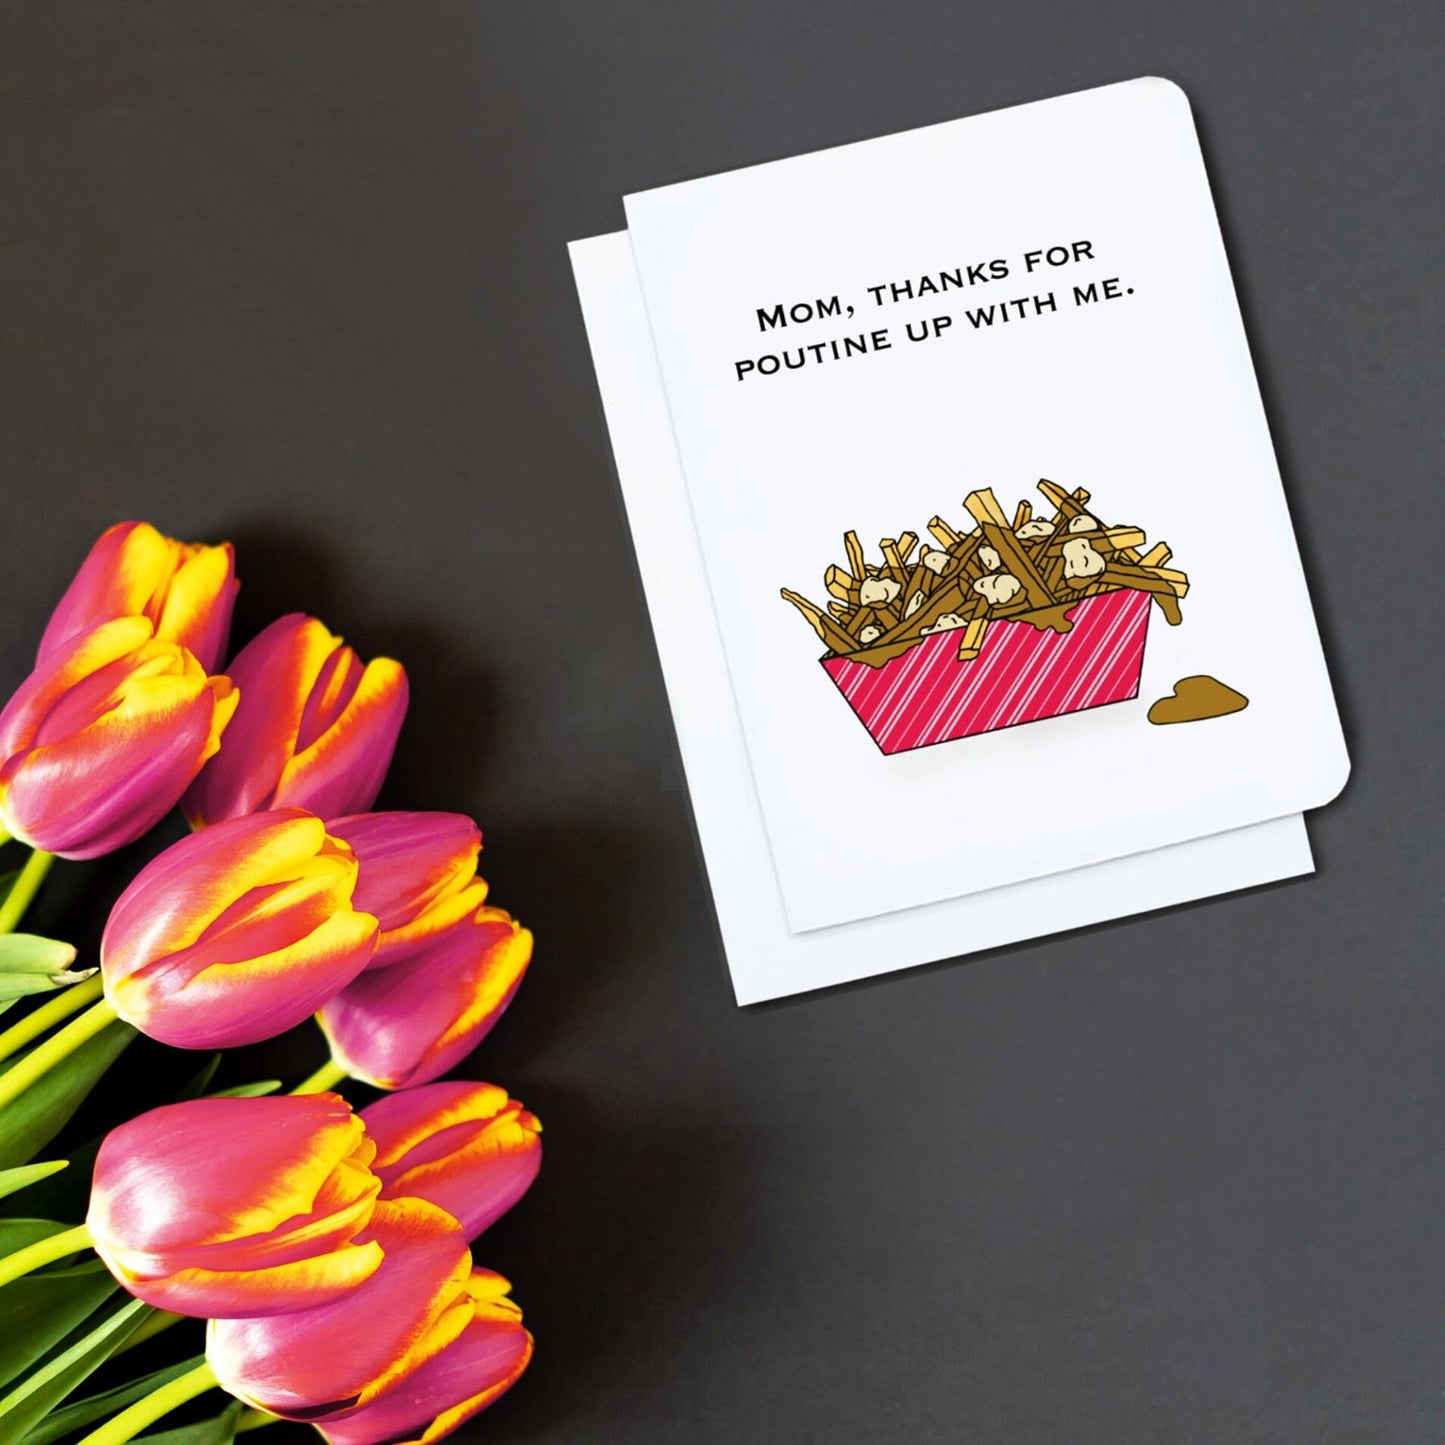 Mother's Day Card - Mom, Thank for Poutine Up With Me - Cards For Mom - Cute Mother's Day Card - Funny Mothers Day Card - Poutine Card